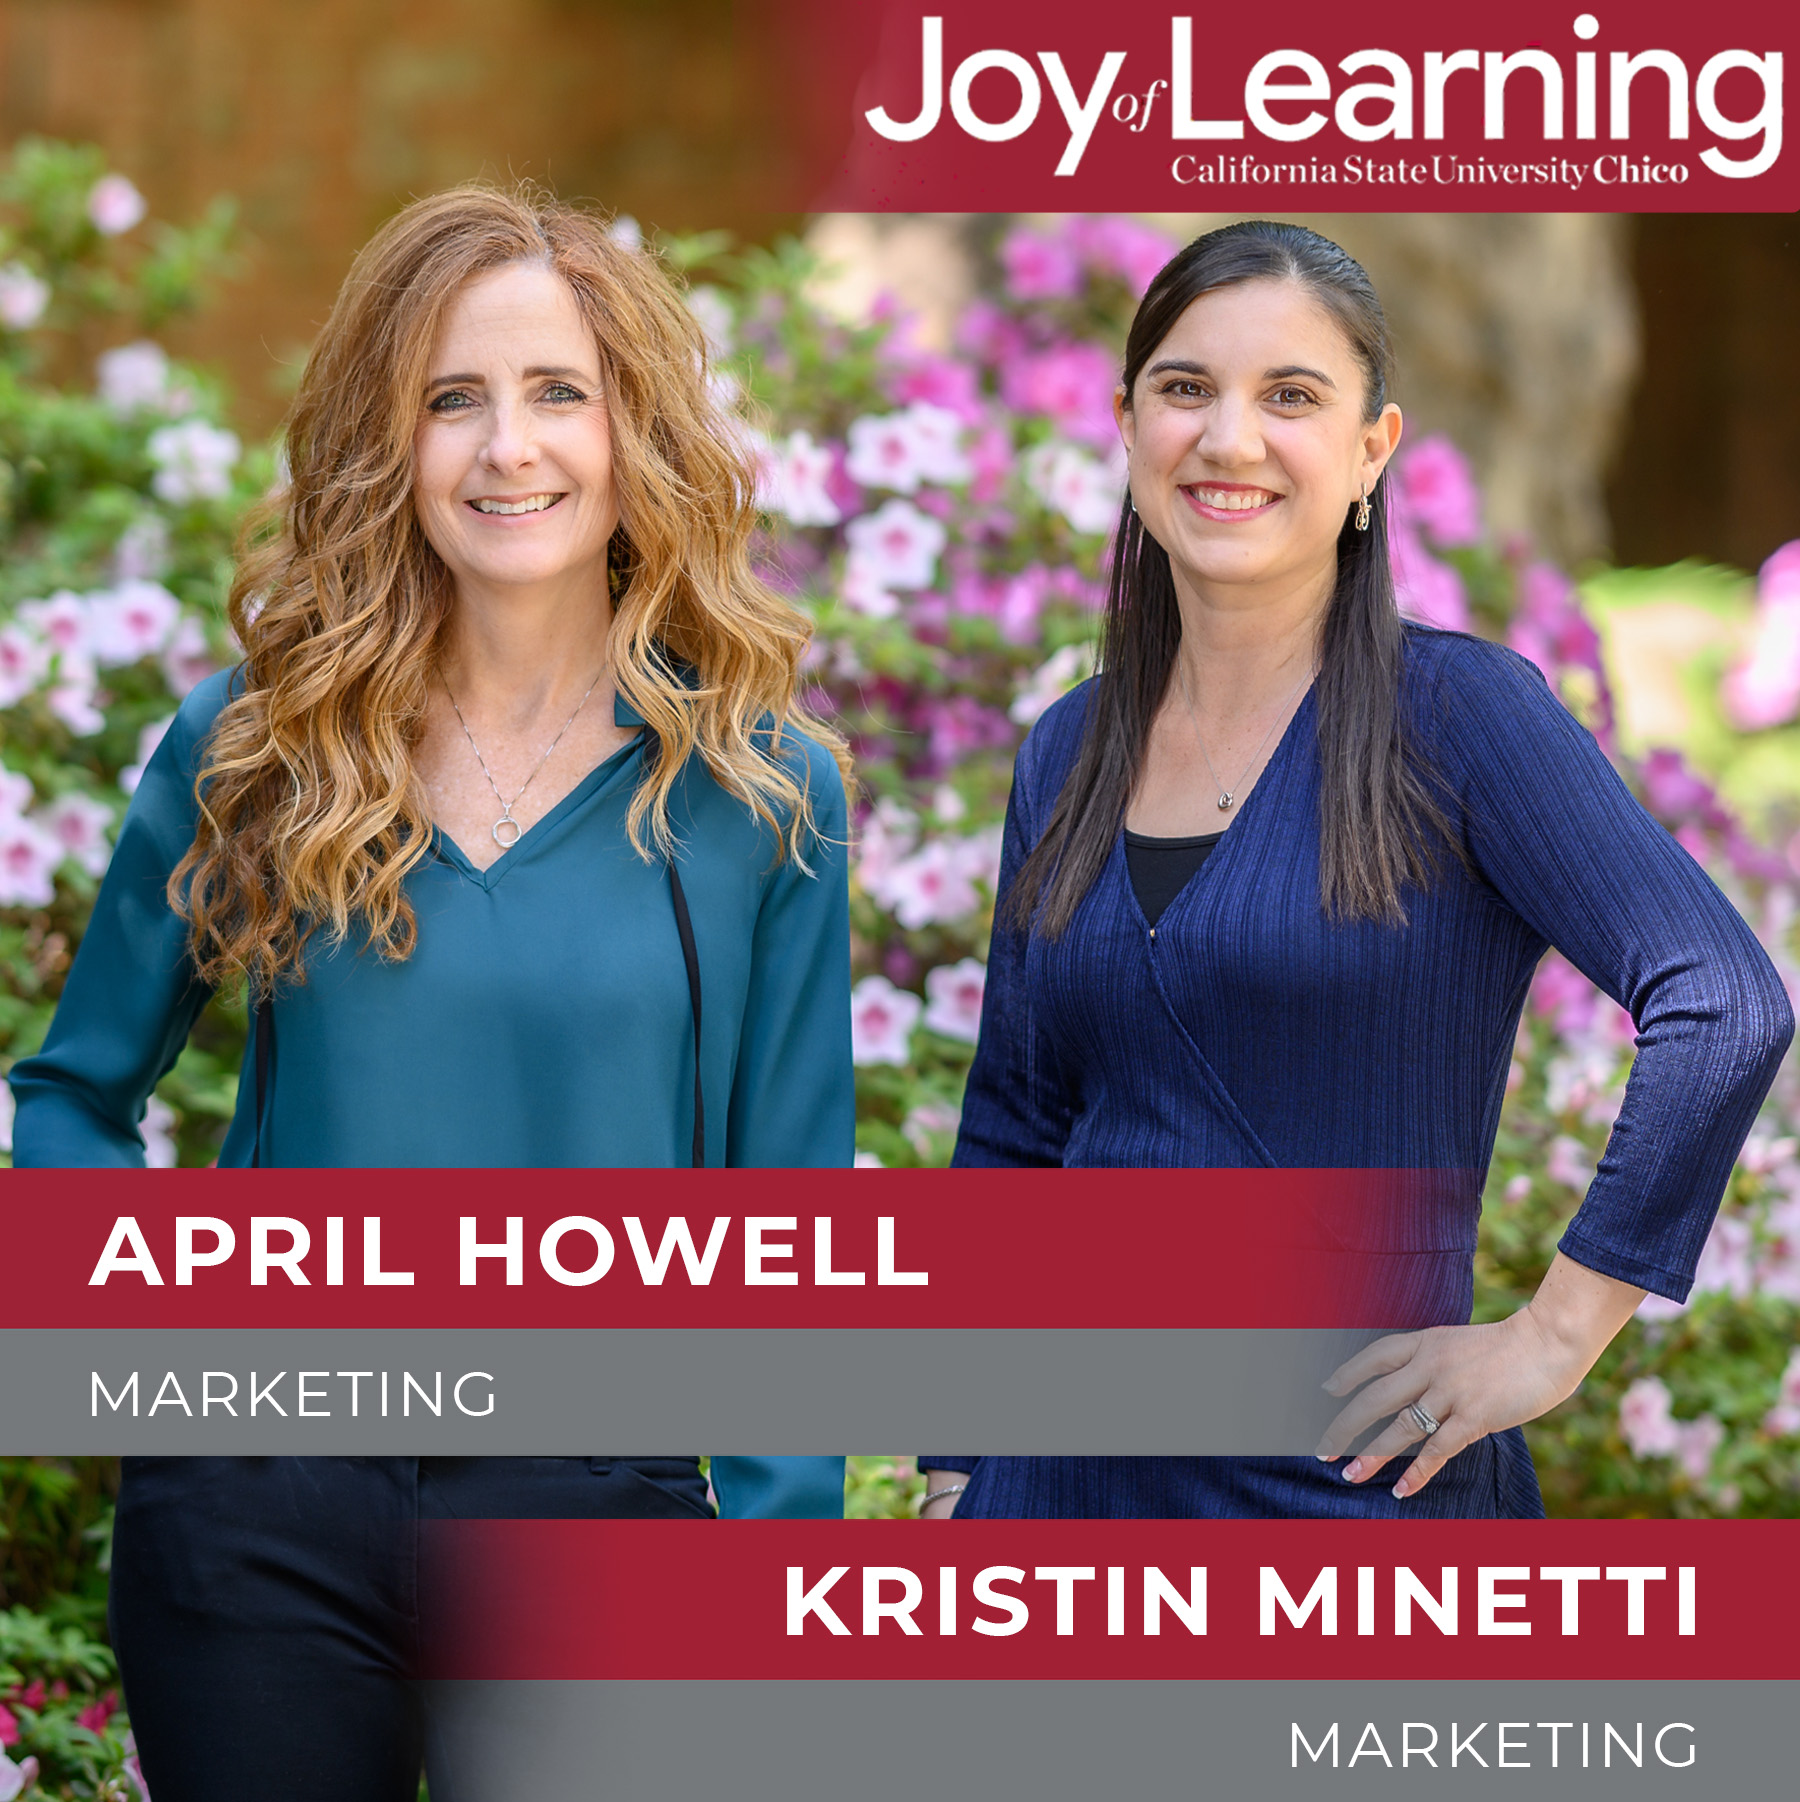 Joy of Learning April Howell and Kristin Minetti, Department of Marketing